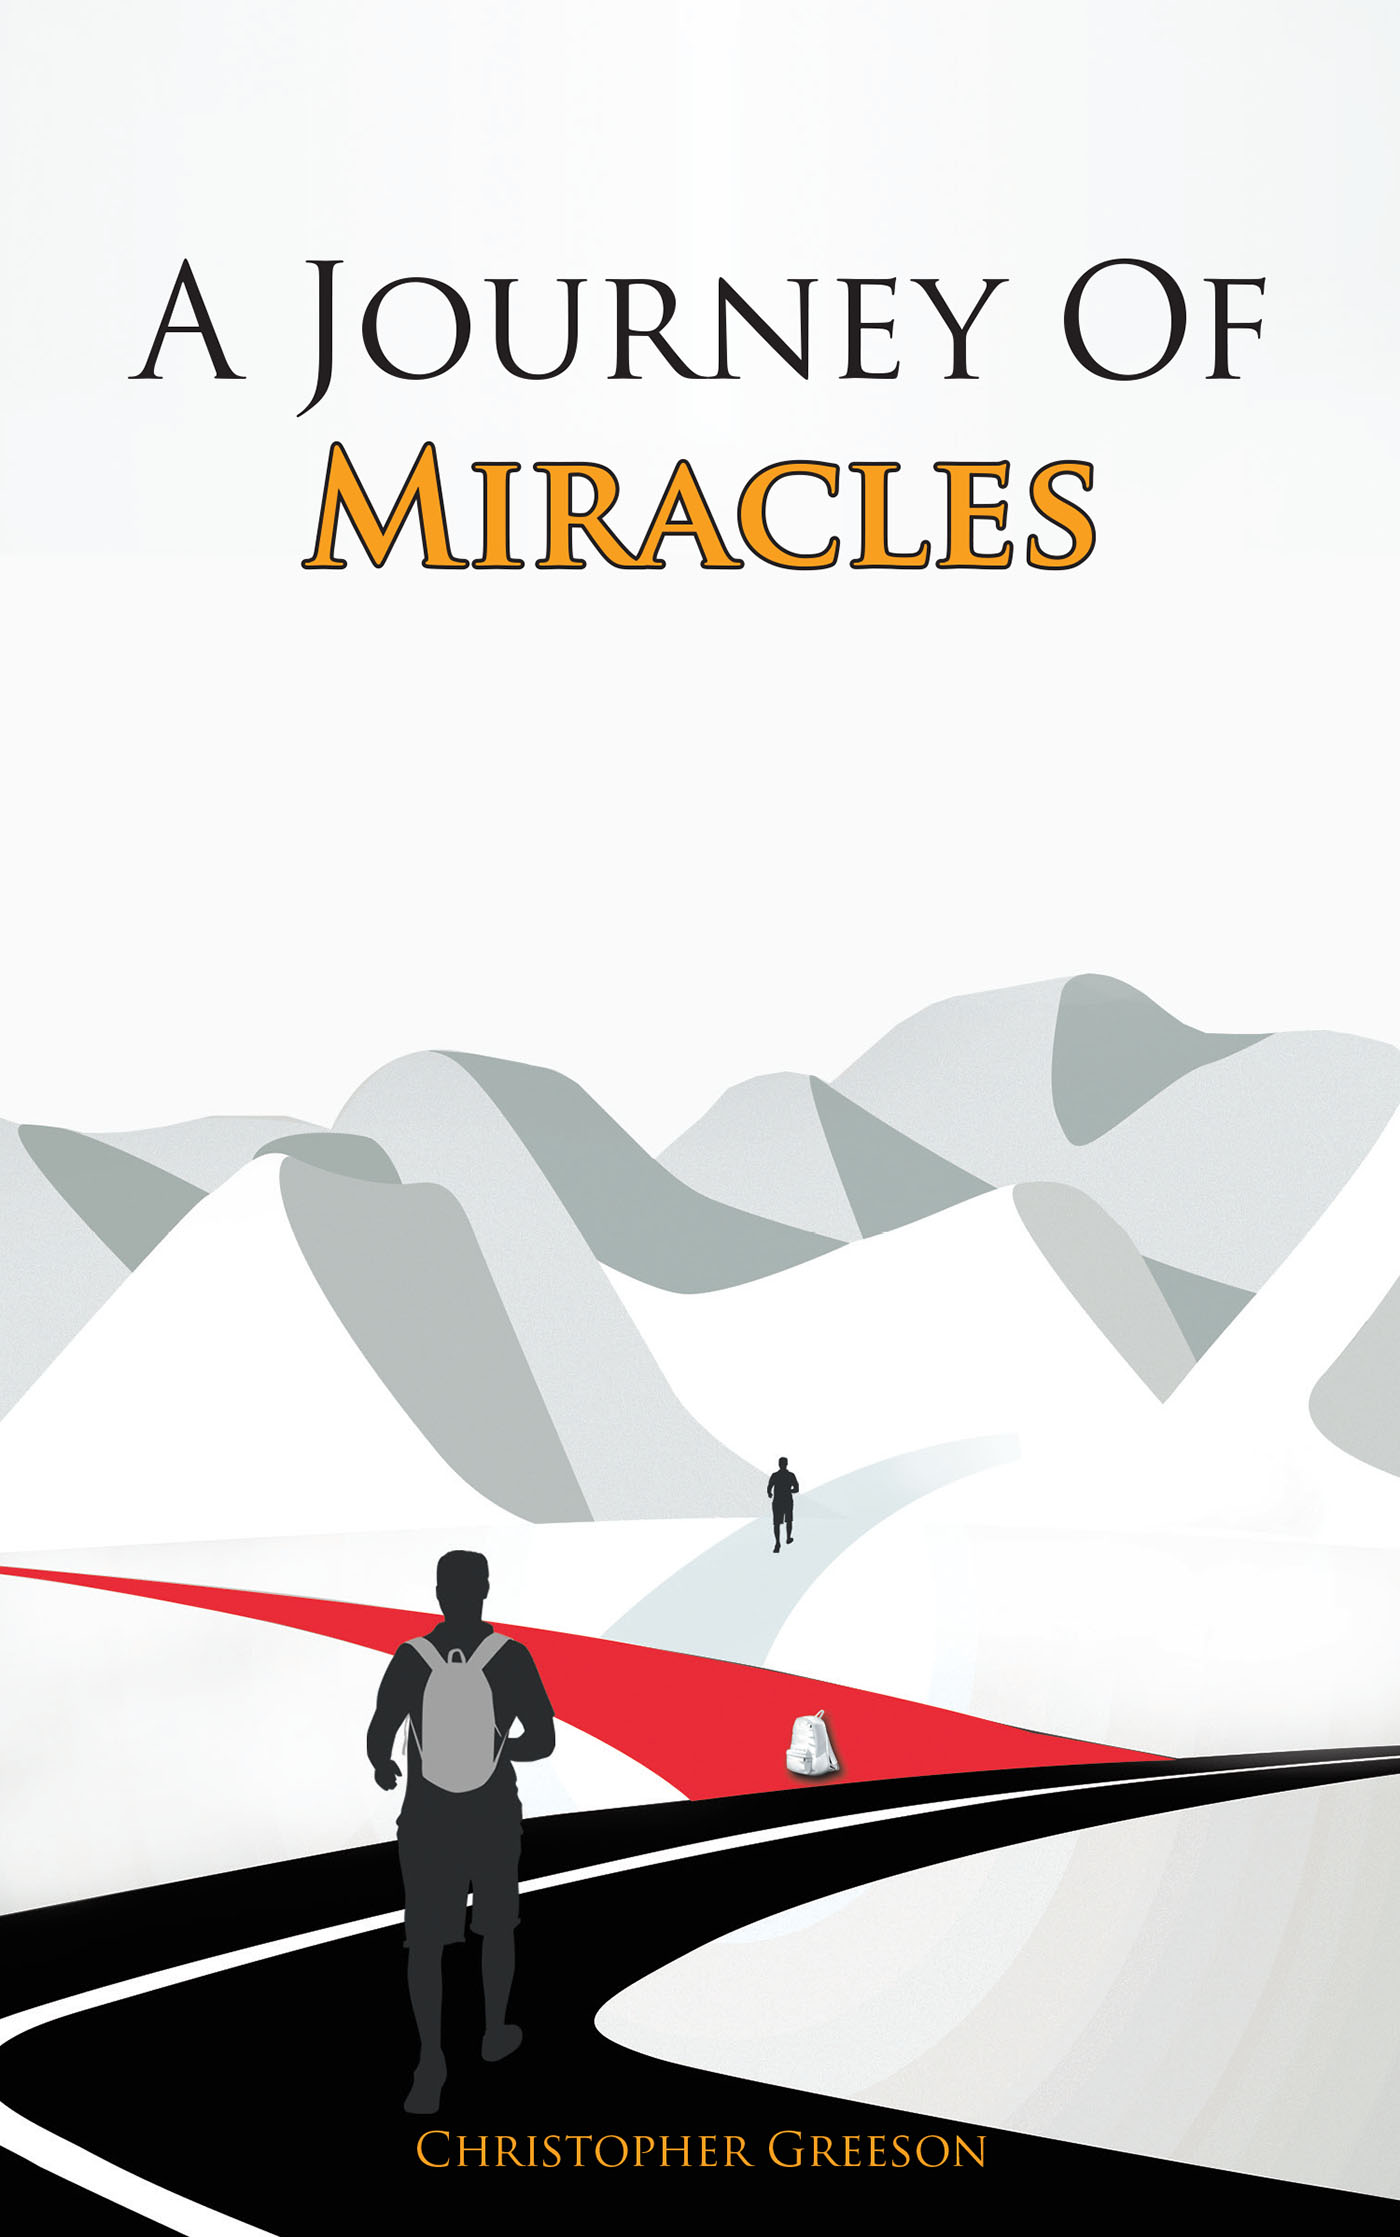 Christopher Greeson’s Newly Released "A Journey Of Miracles" is a Personal Reflection on Momentous Occasions Within the Author’s Life